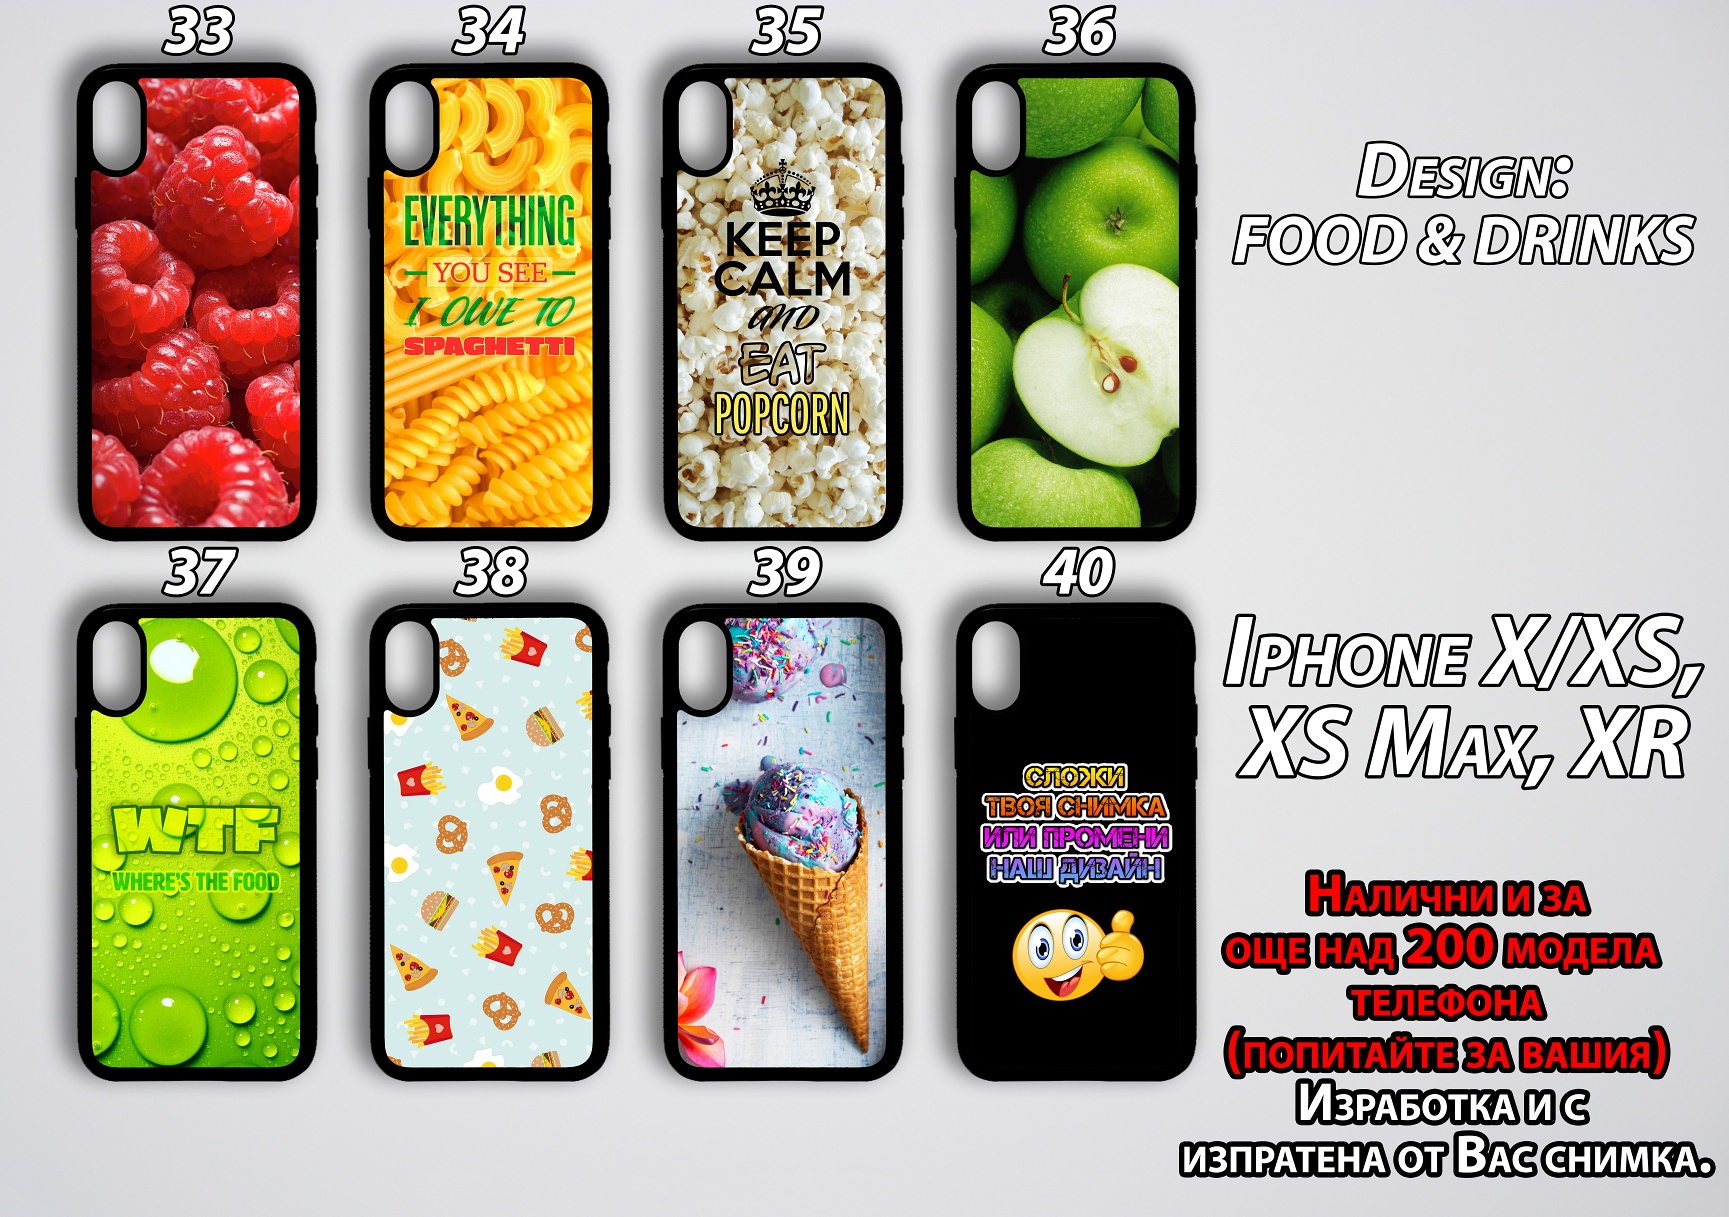 mobile phone cases NEW-Food-Drinks 33